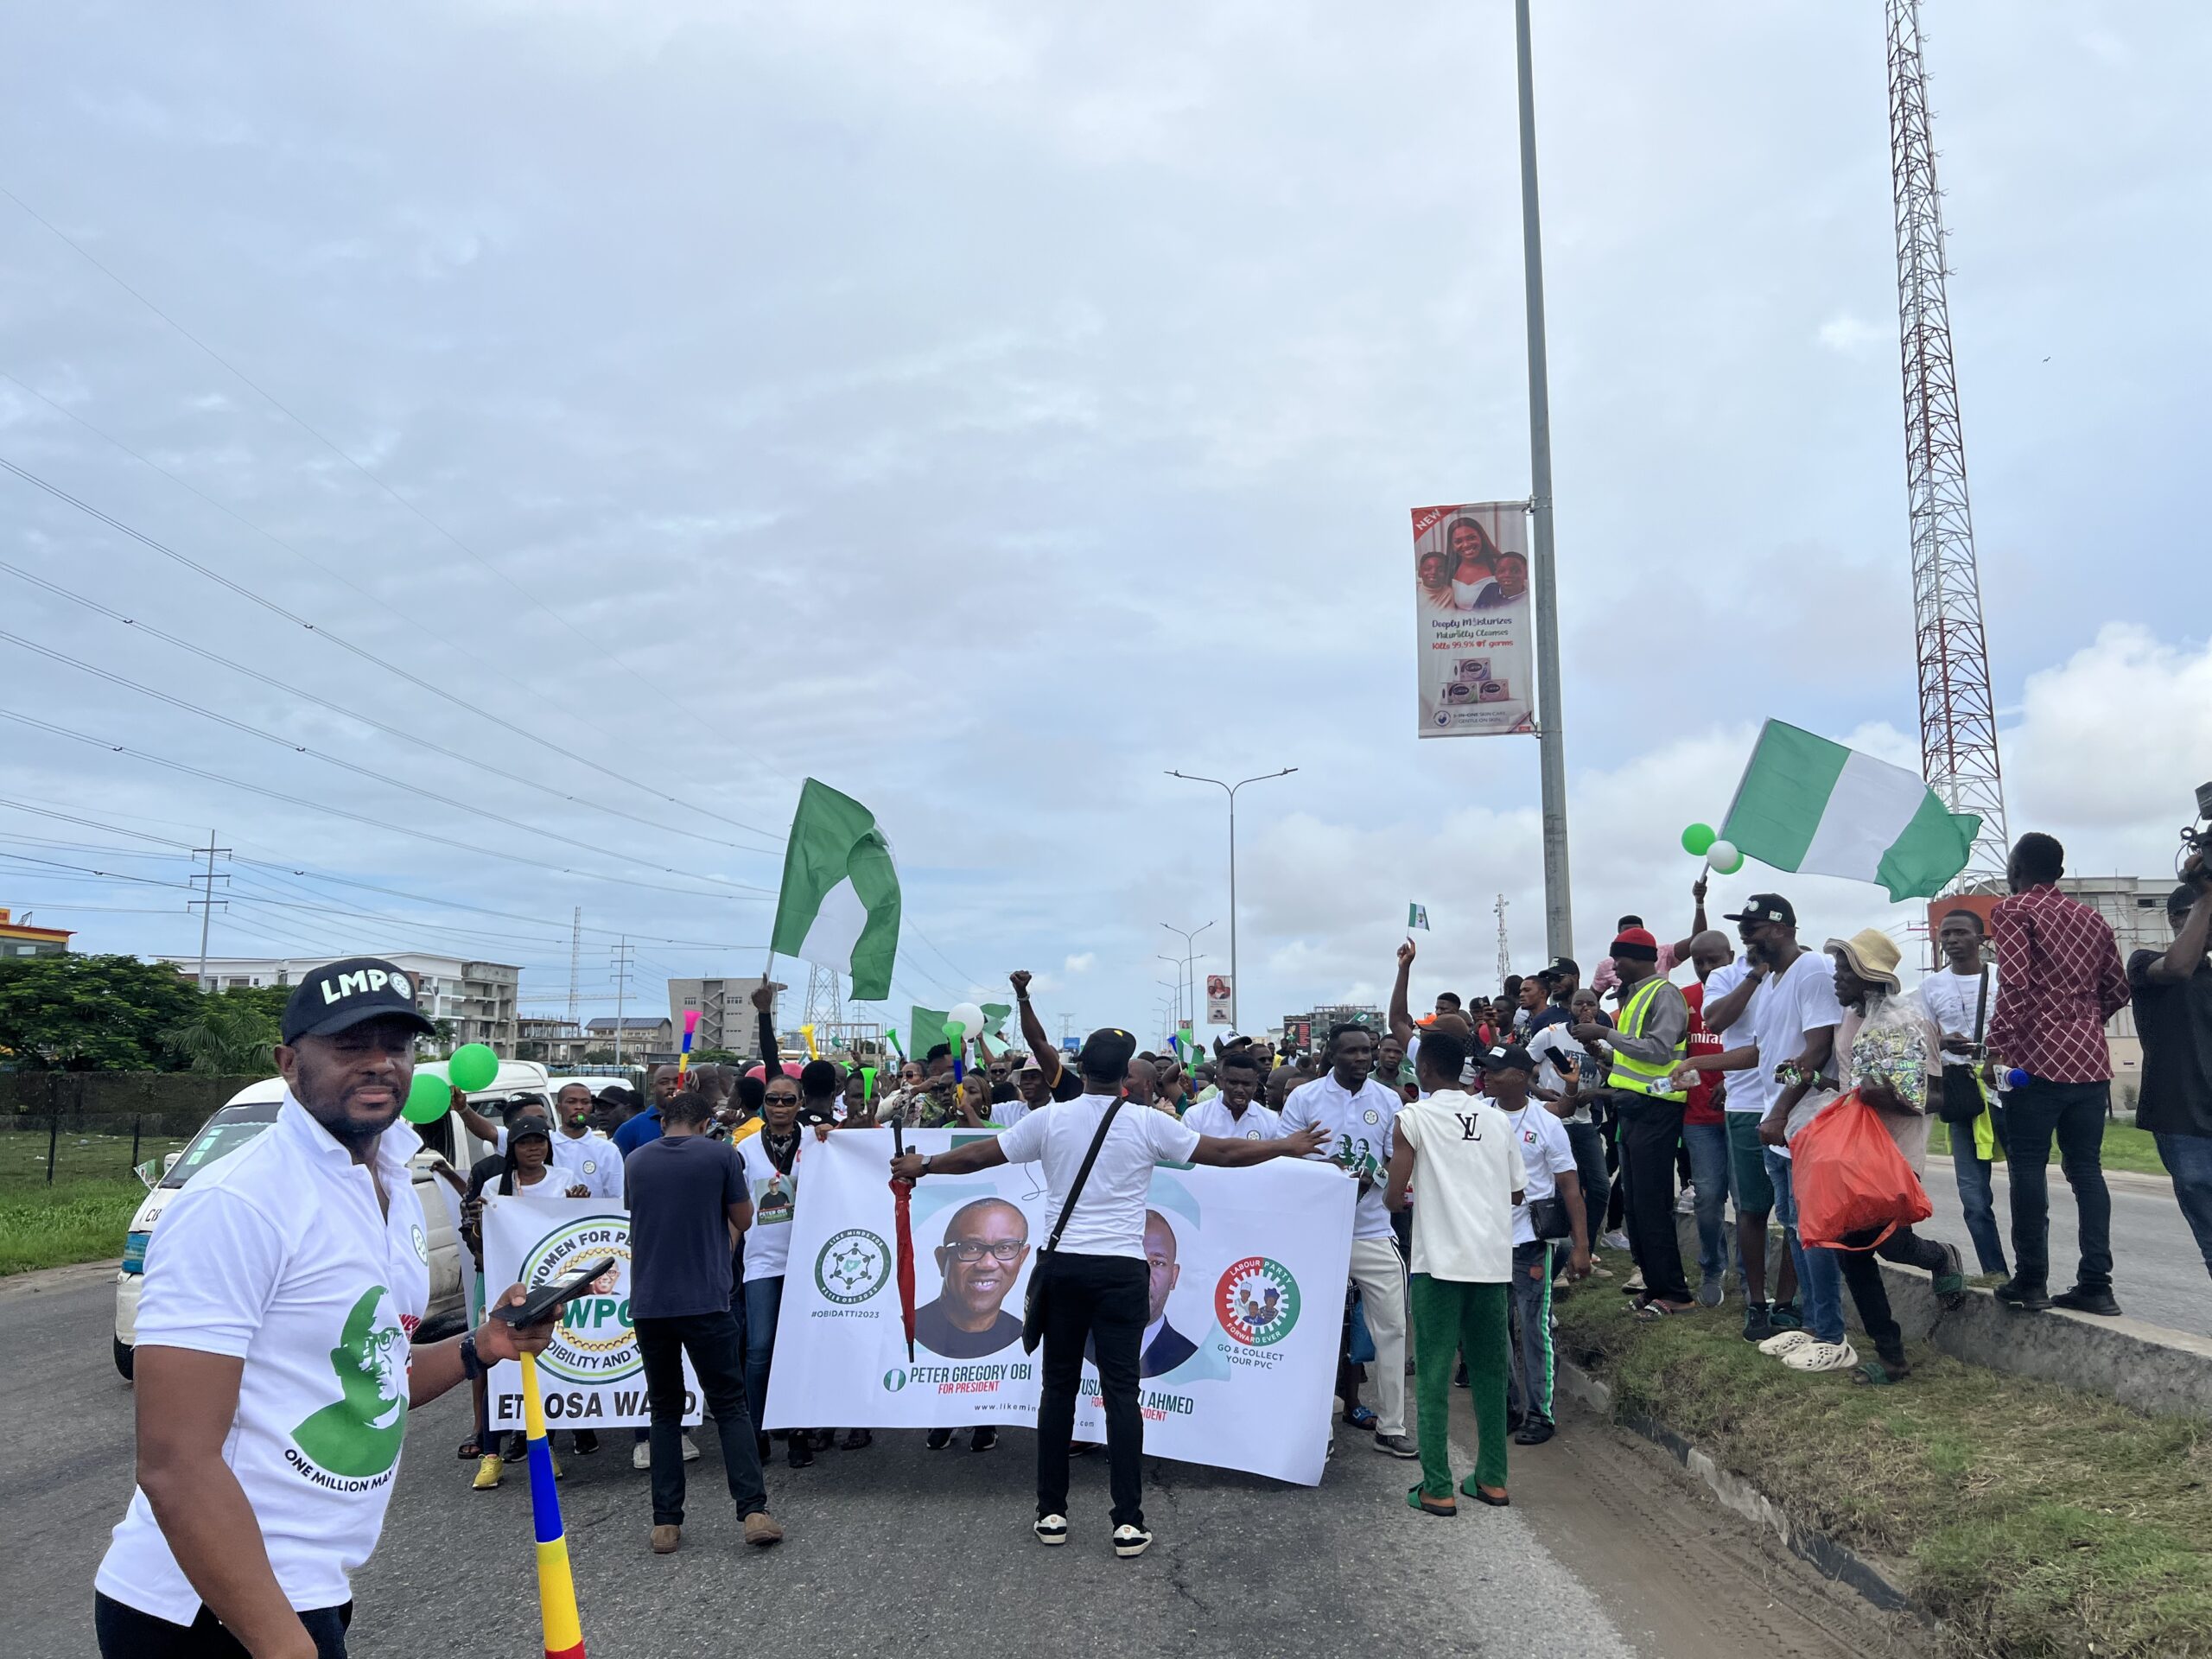 Nigerian youths march for Peter Obi in Lekki